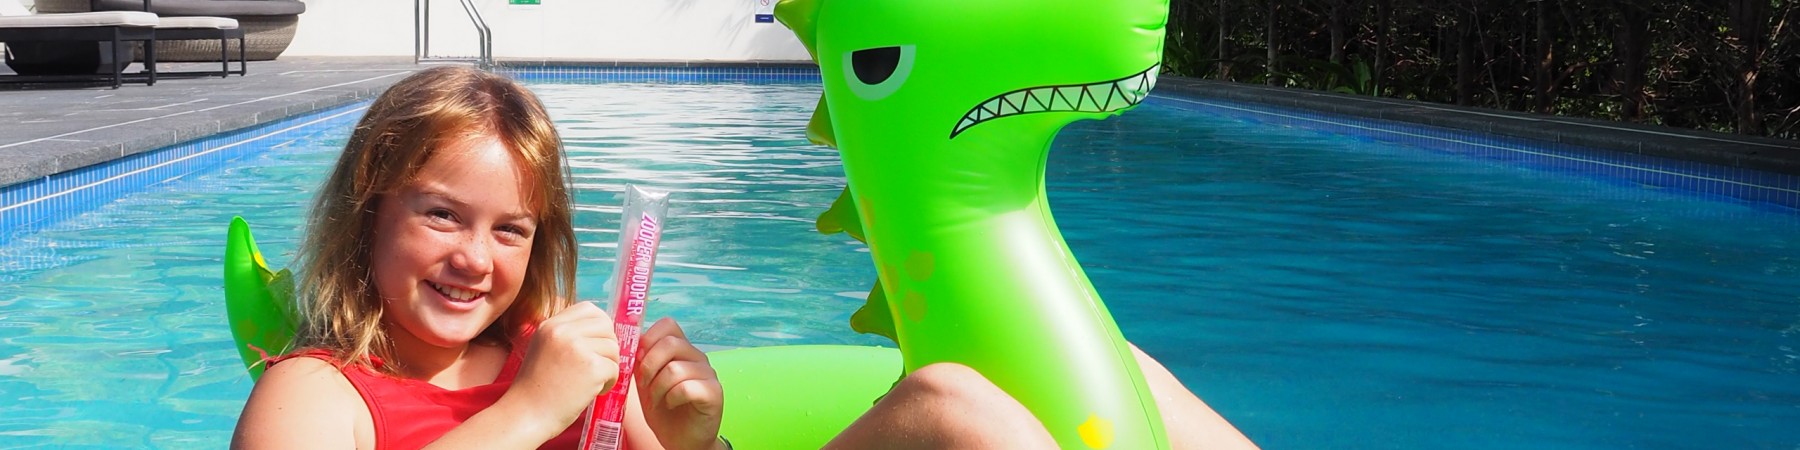 Kids in the pool with Dinosaur Inflatable Toy